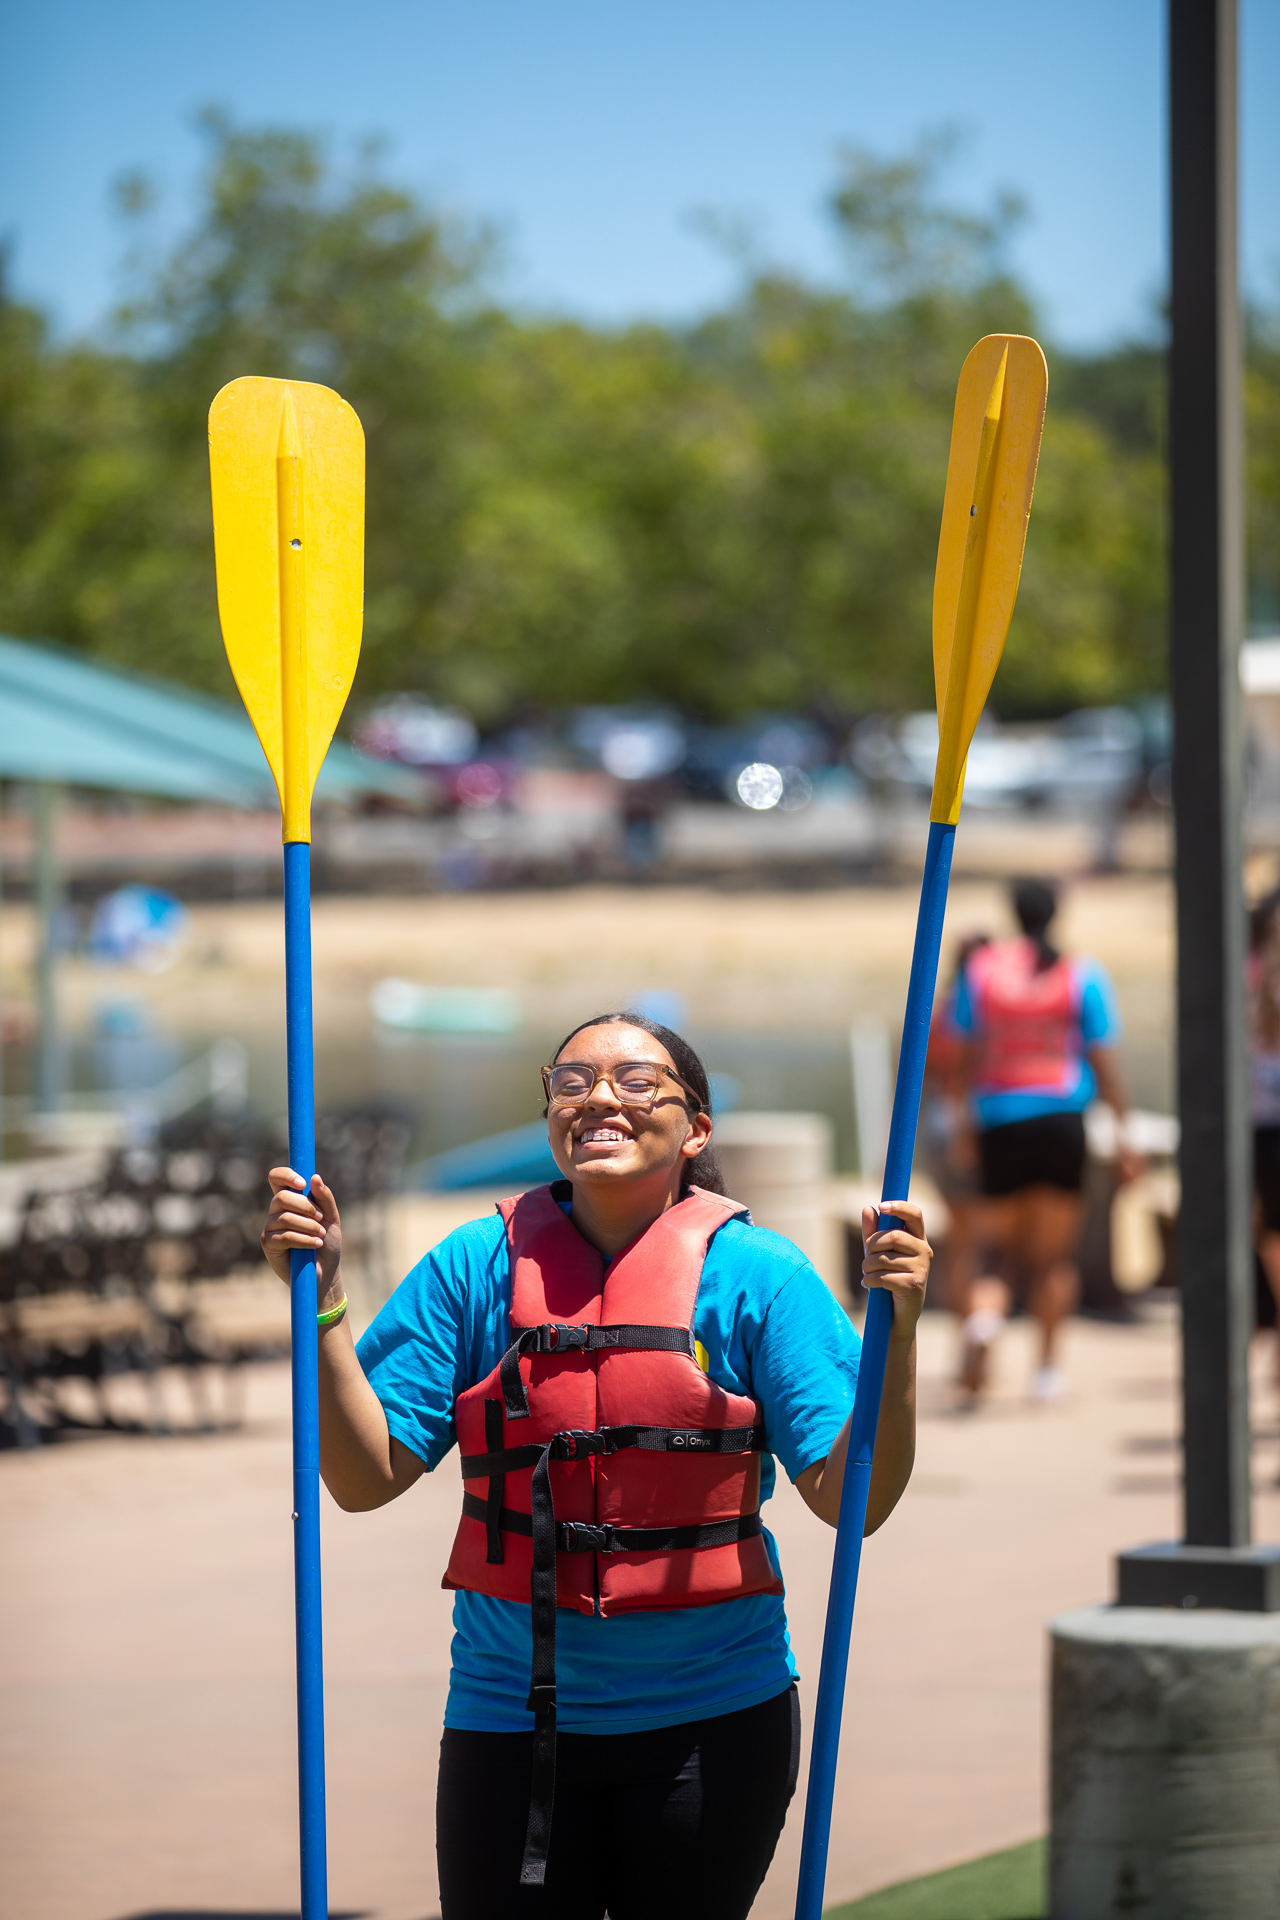 A Roberts Family Development Center Freedom School student smiles and holds two large kayak paddles, one in each arm, at the Sac State Aquatic Center.